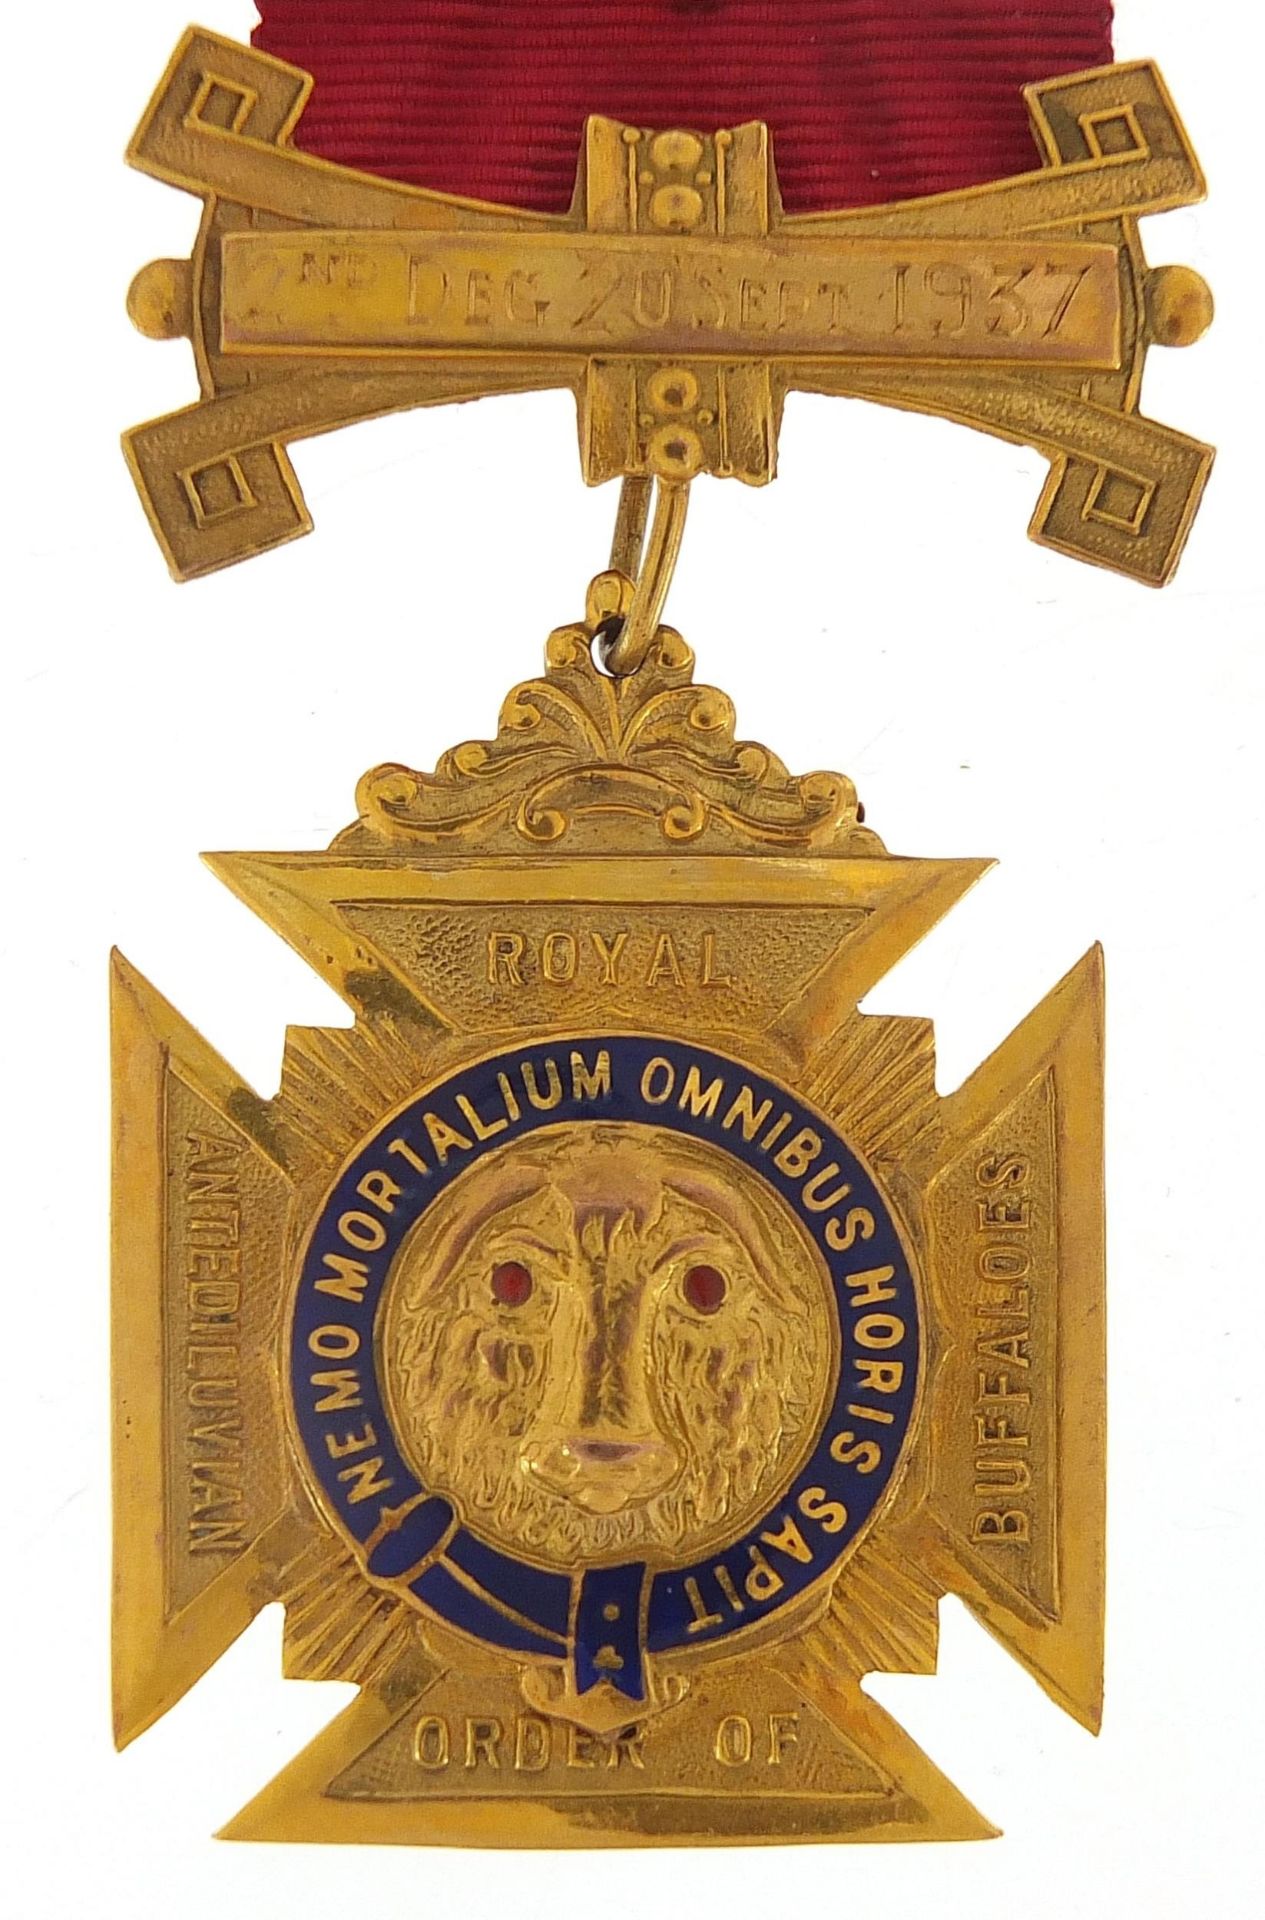 9ct gold and enamel RAOB medal with silk ribbon and bars, awarded to Bro Sidney Russell, C.P by